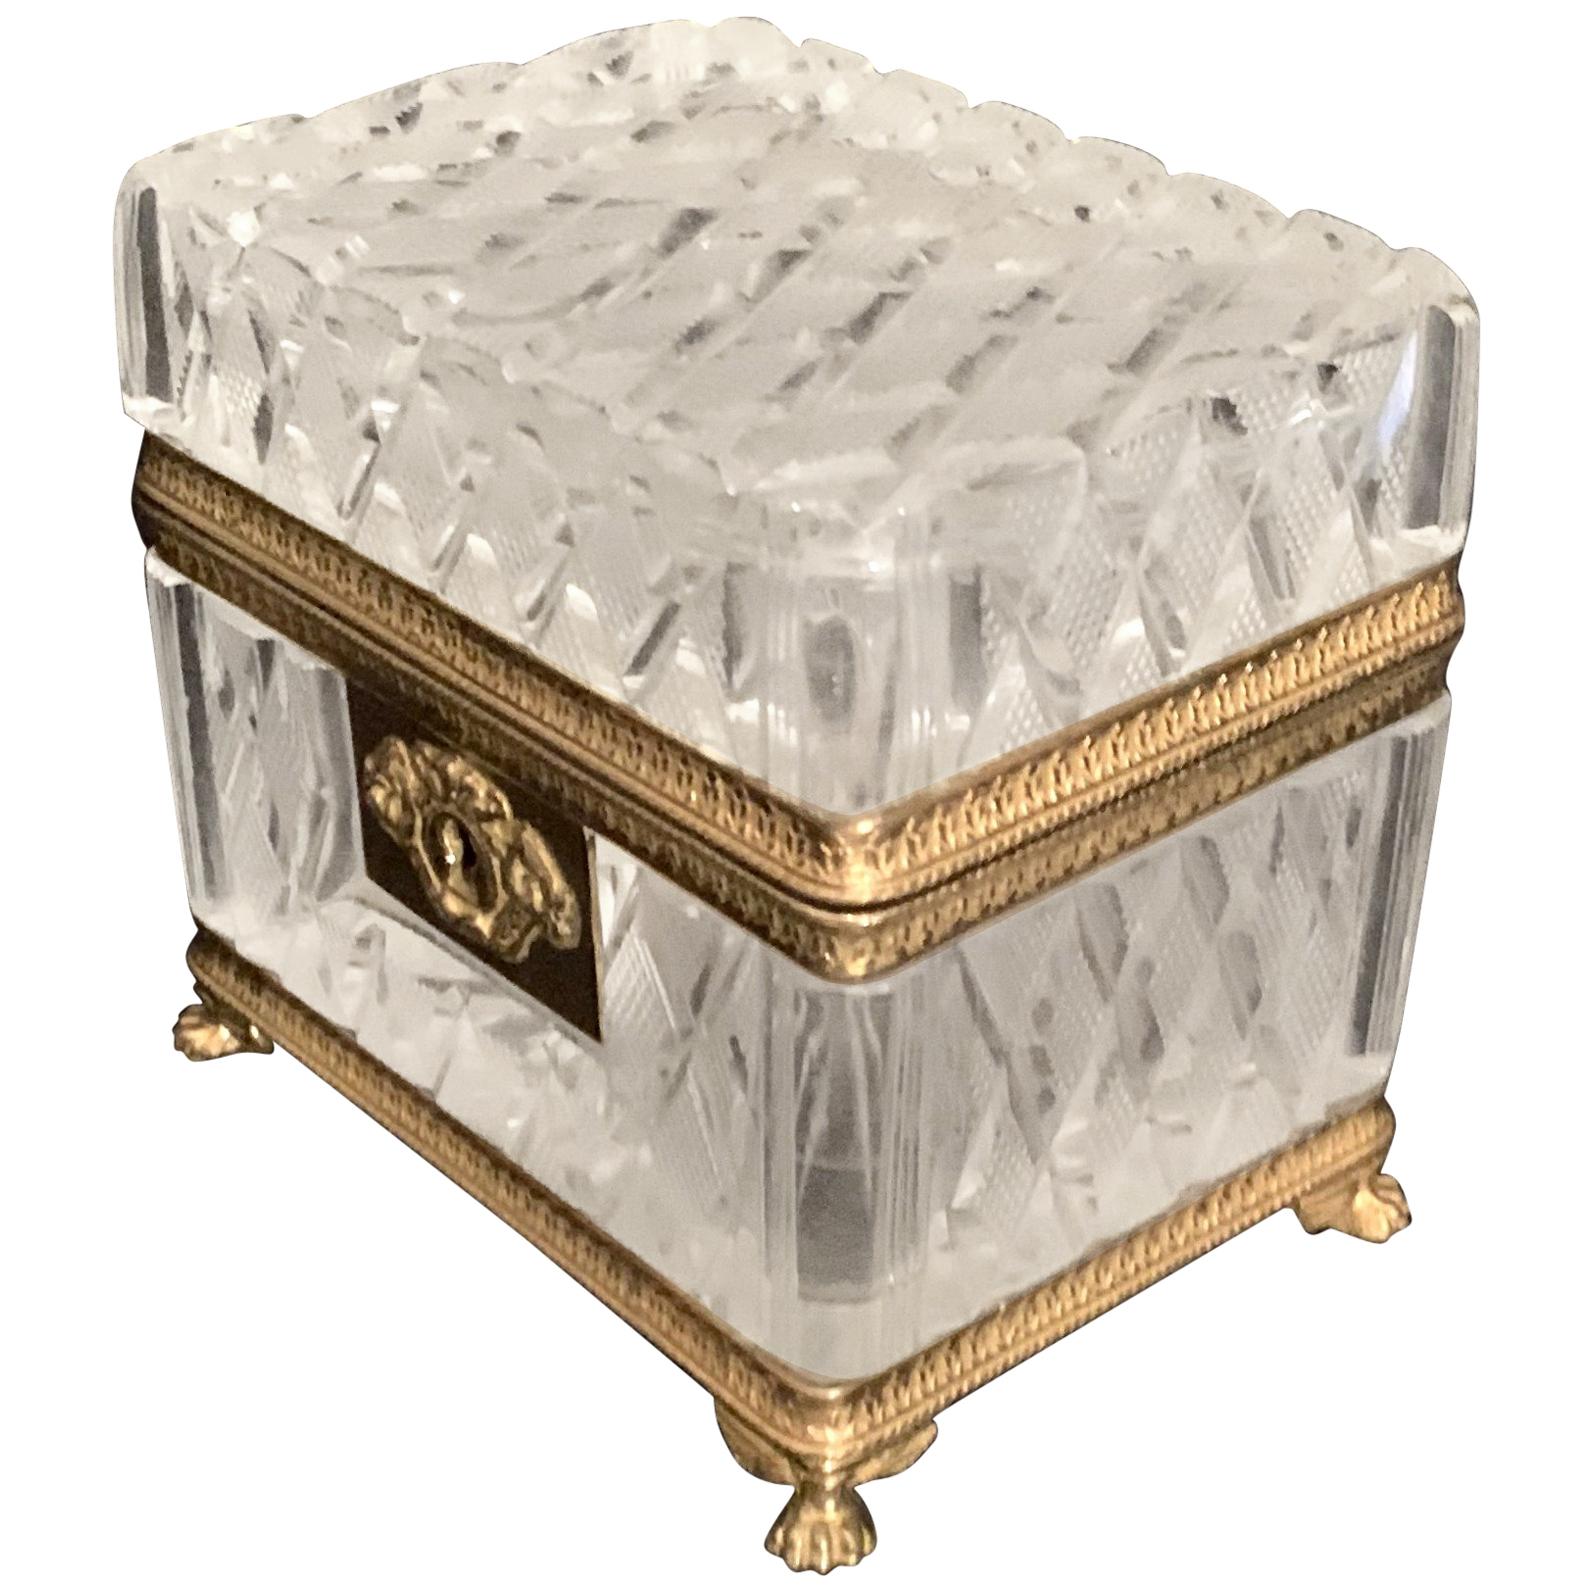 Wonderful Baccarat French Ormolu Faceted Cut Crystal Box Casket Jewelry Case